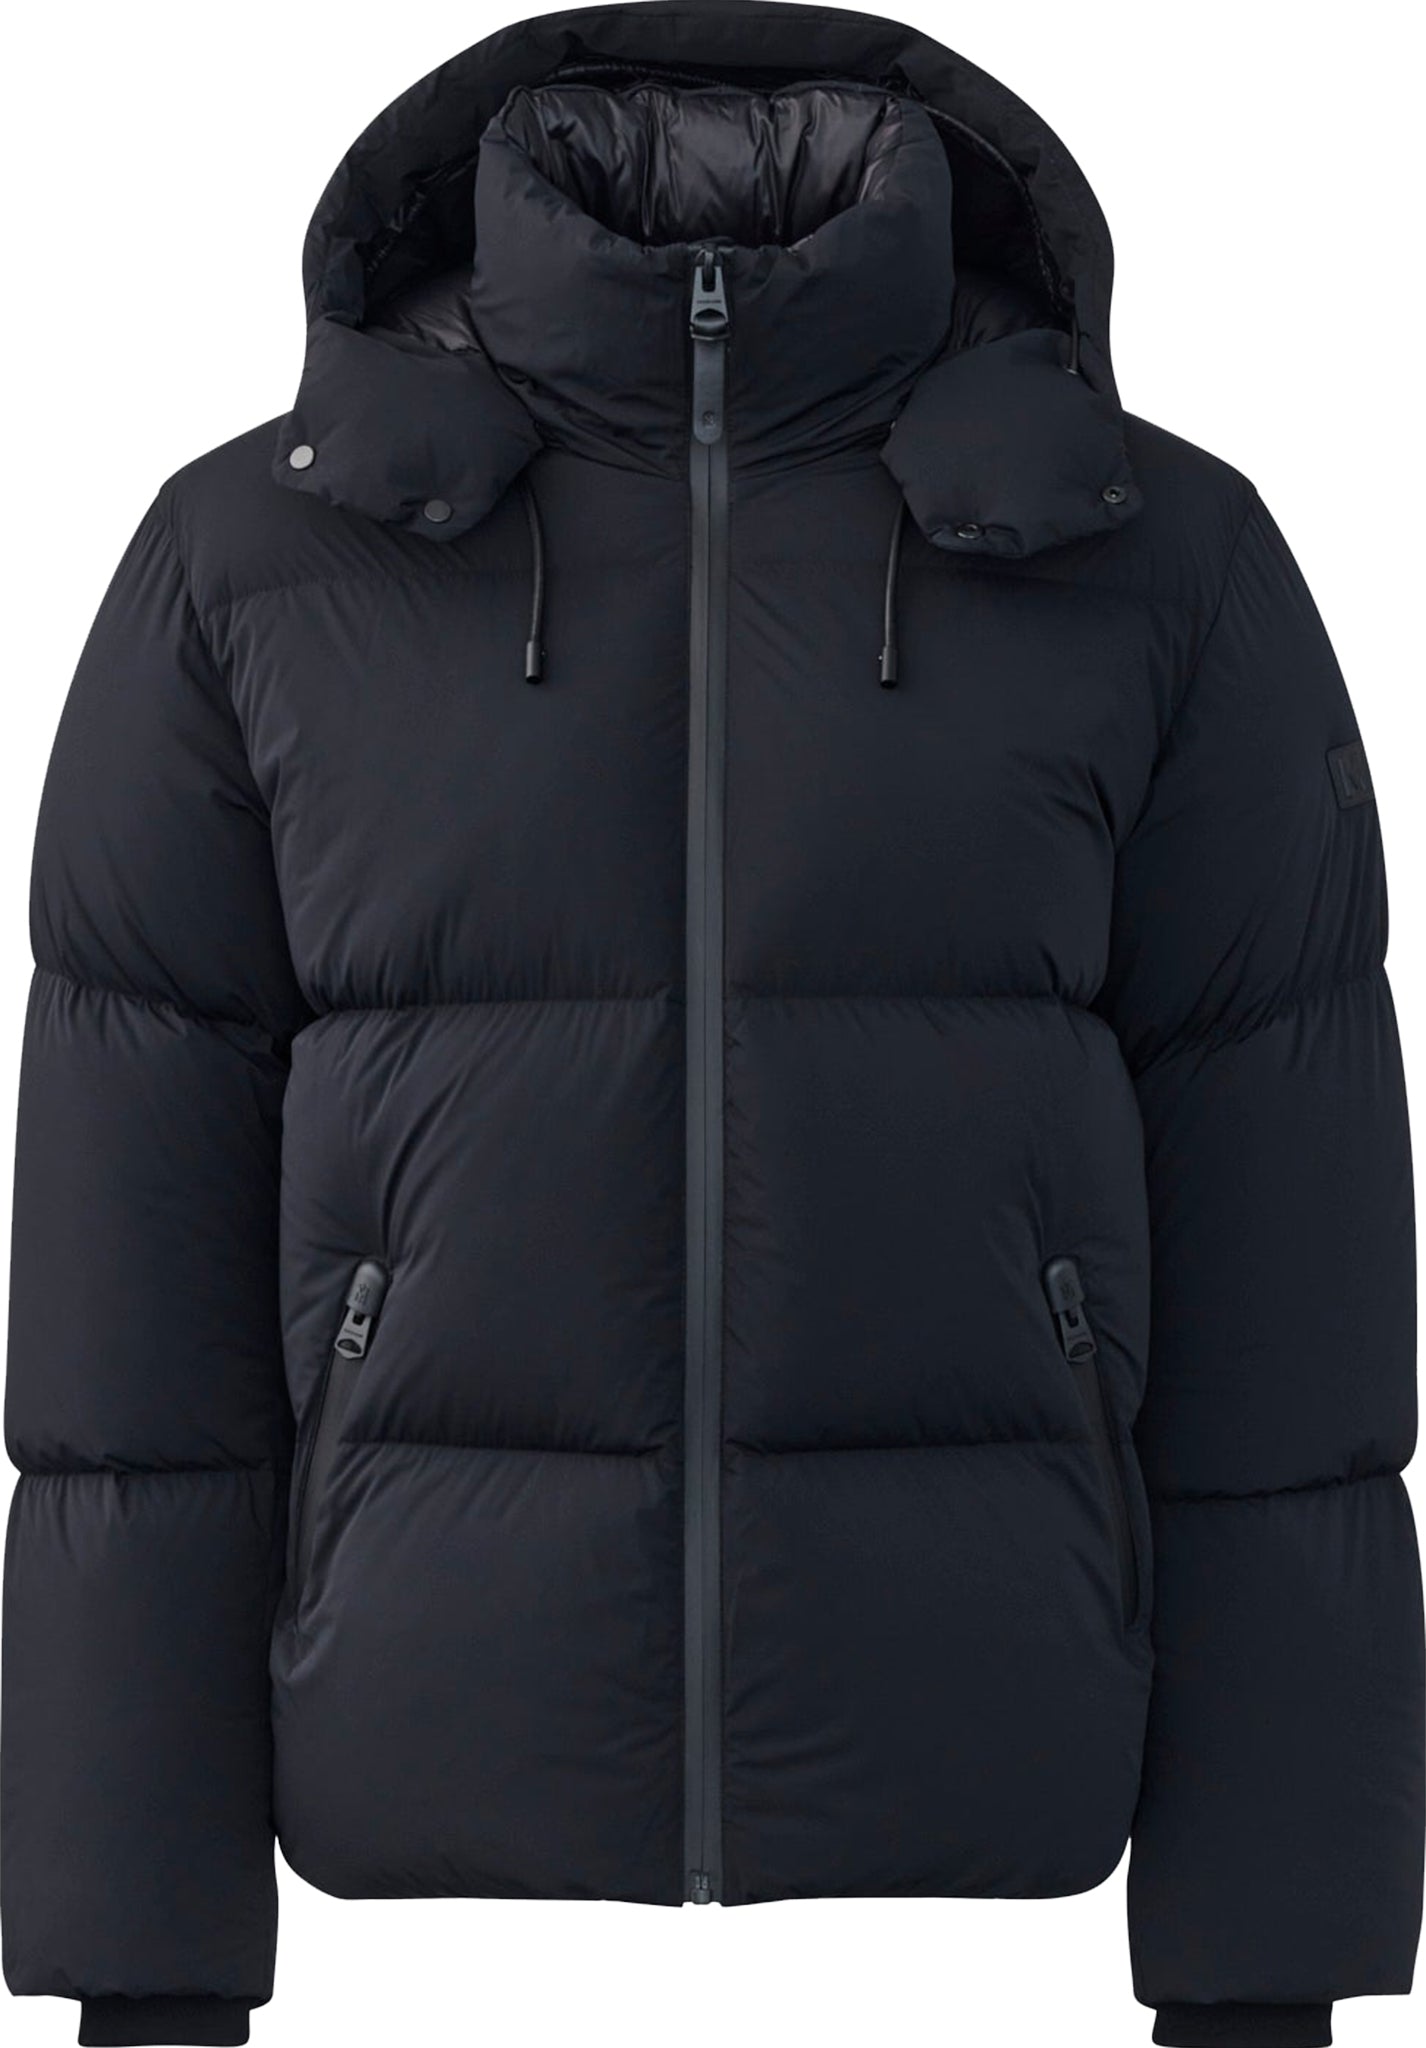 Mackage Kent Stretch Down Jacket with Removable Hood - Men's | Altitude ...